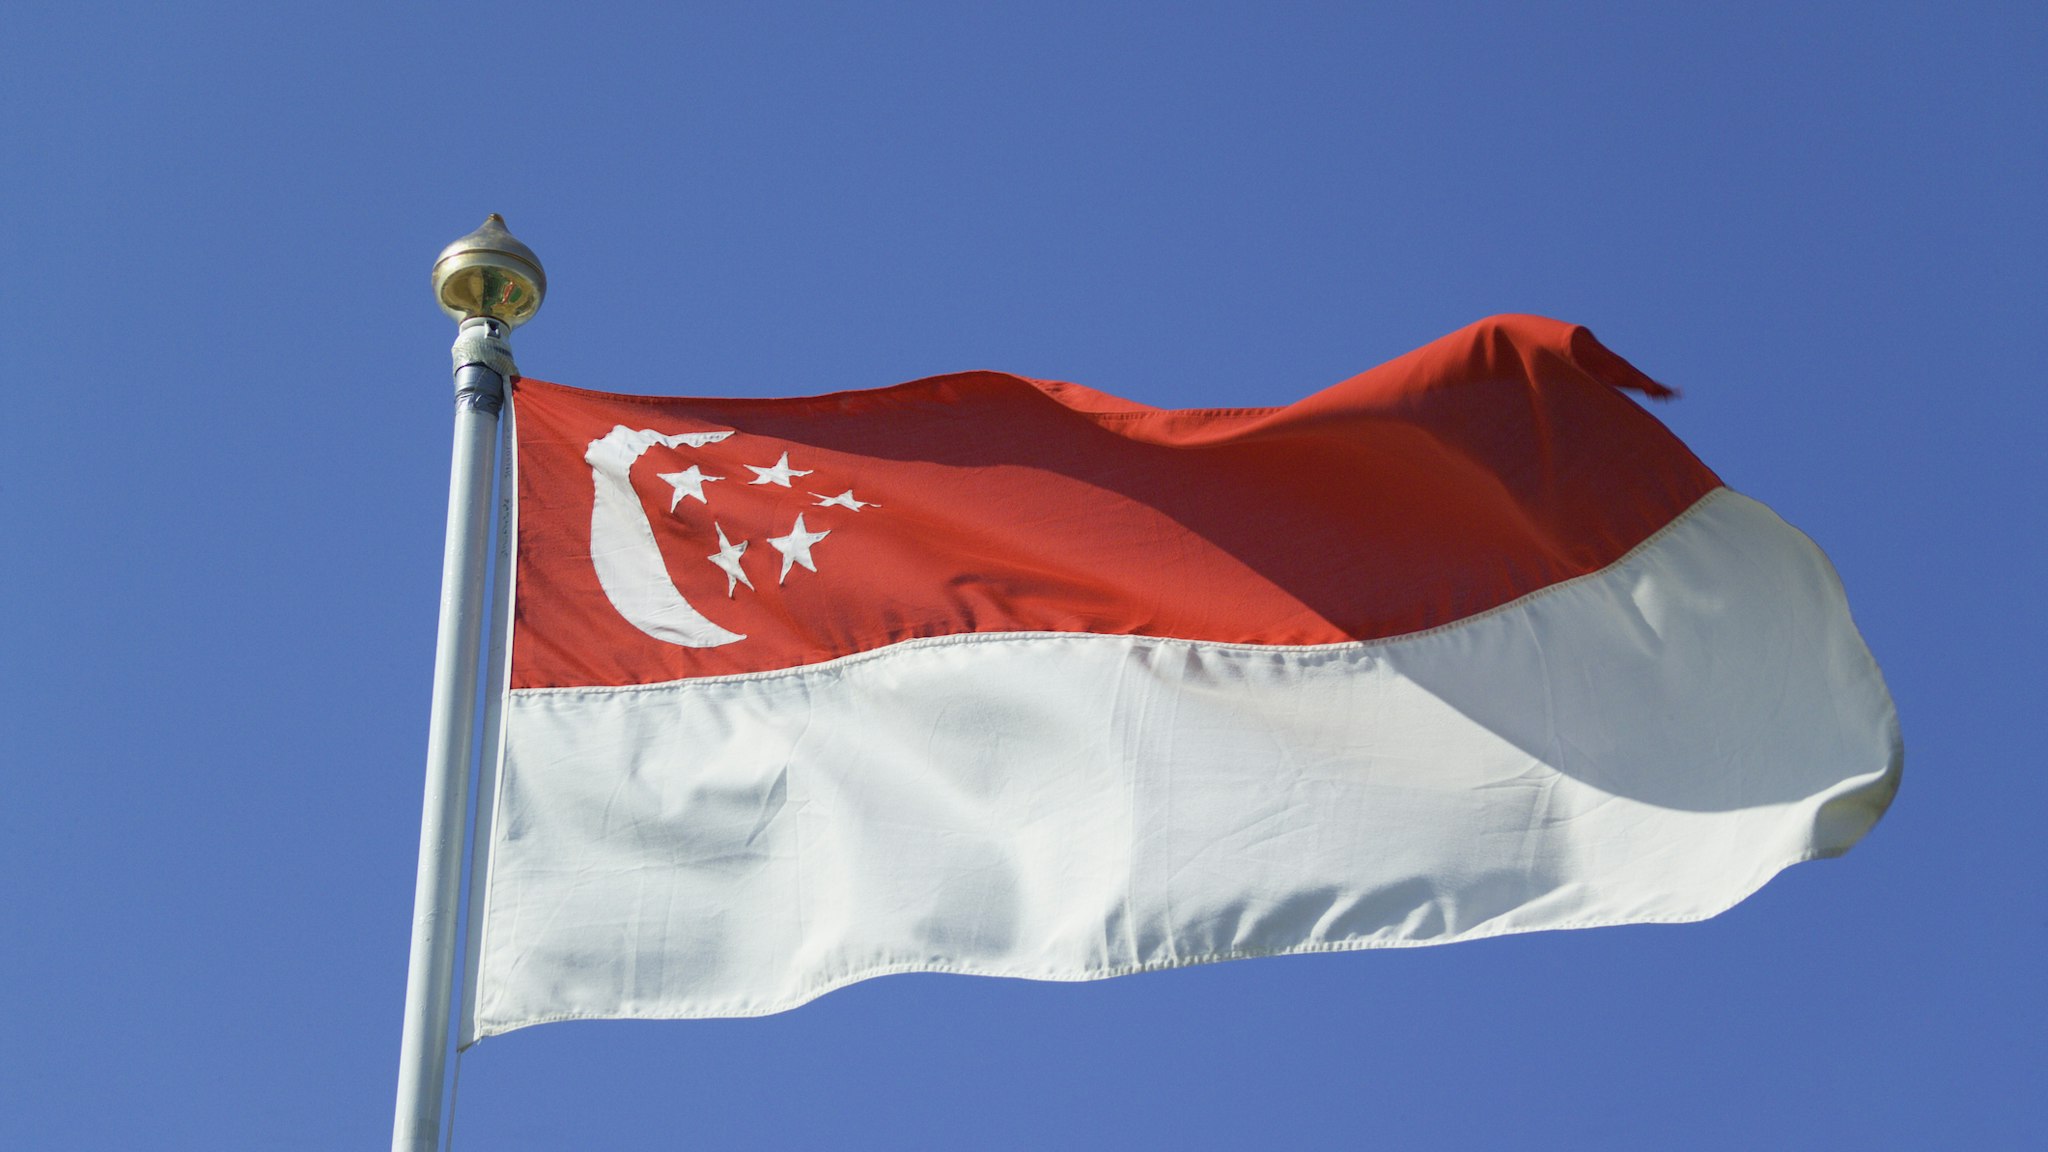 Close up of singaporean flag against blue sky, low angle view - stock photo